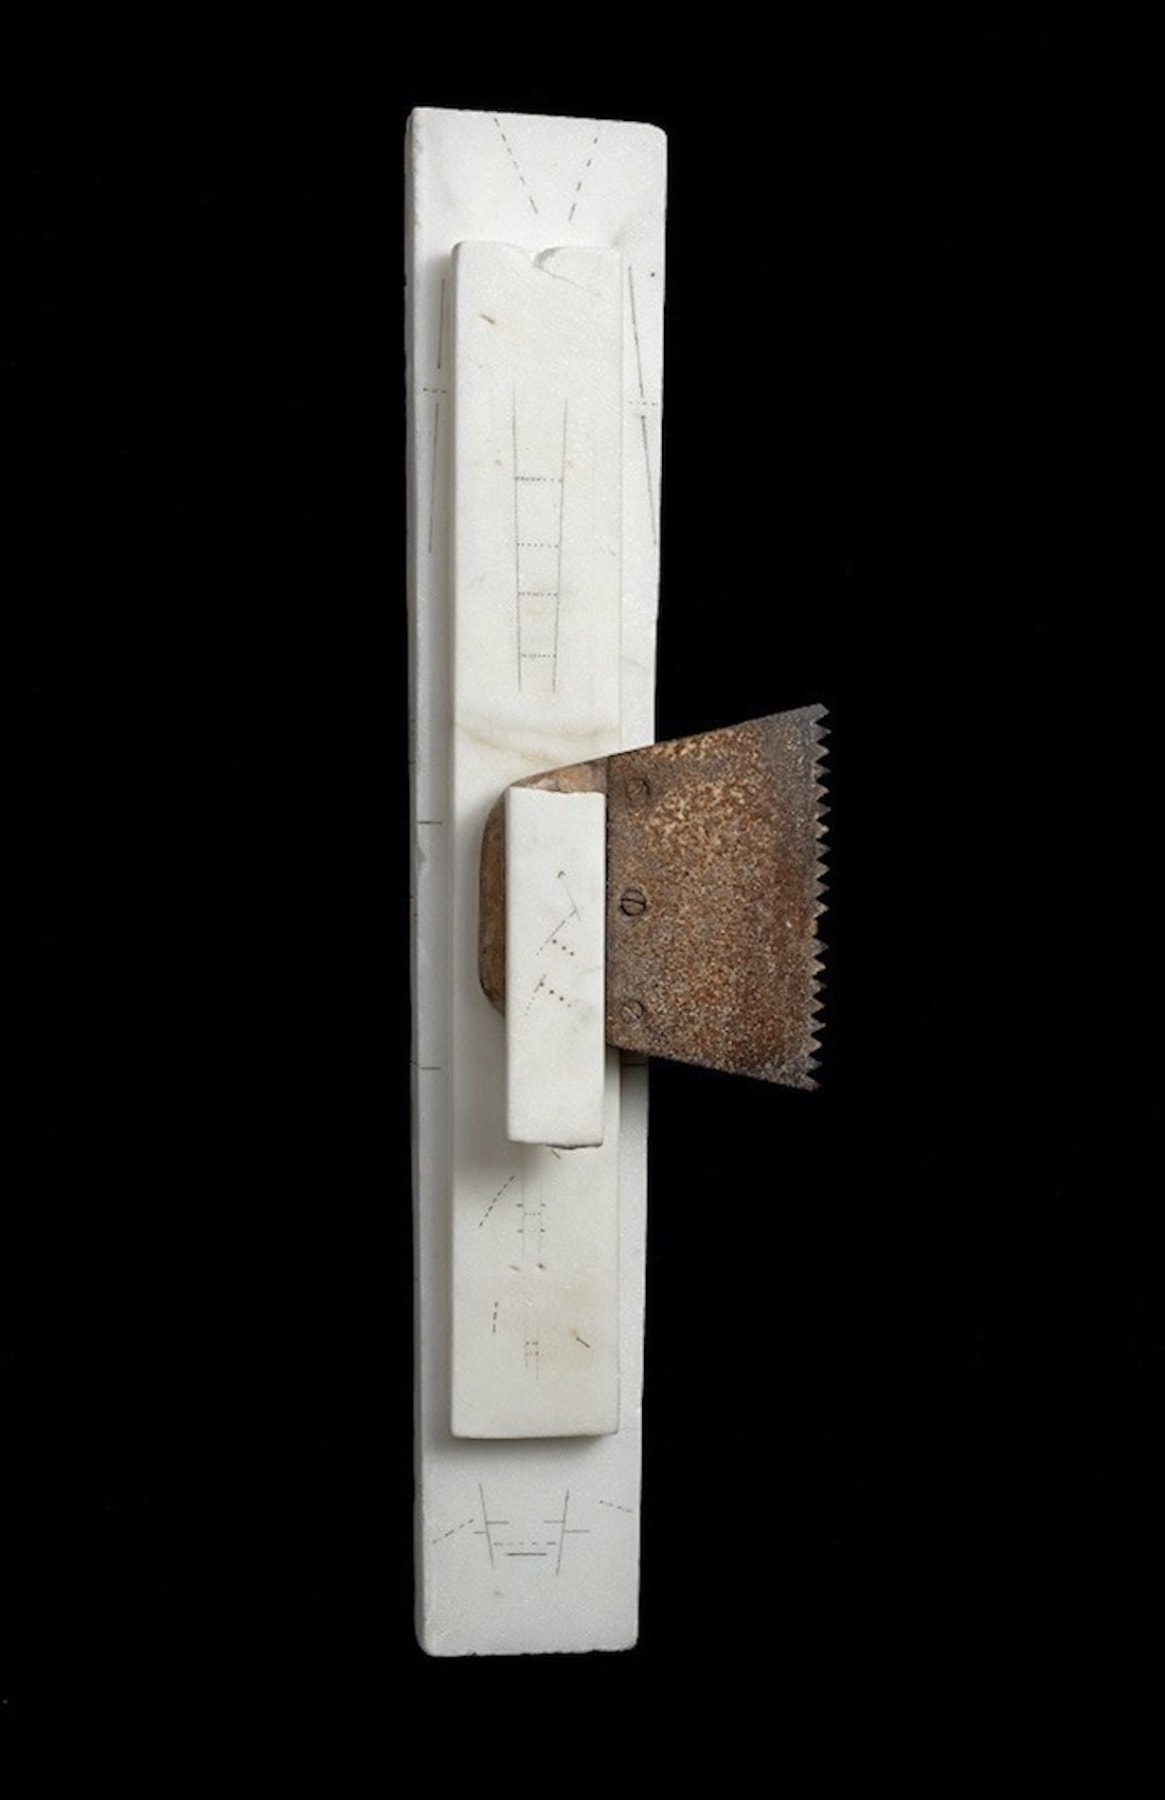 Untitled, 1991,&nbsp;Drawing and mixed media on marble,&nbsp;14 15/16 x 4 5/16 x 2 3/4 in. (38 x 11 x 7 cm.)